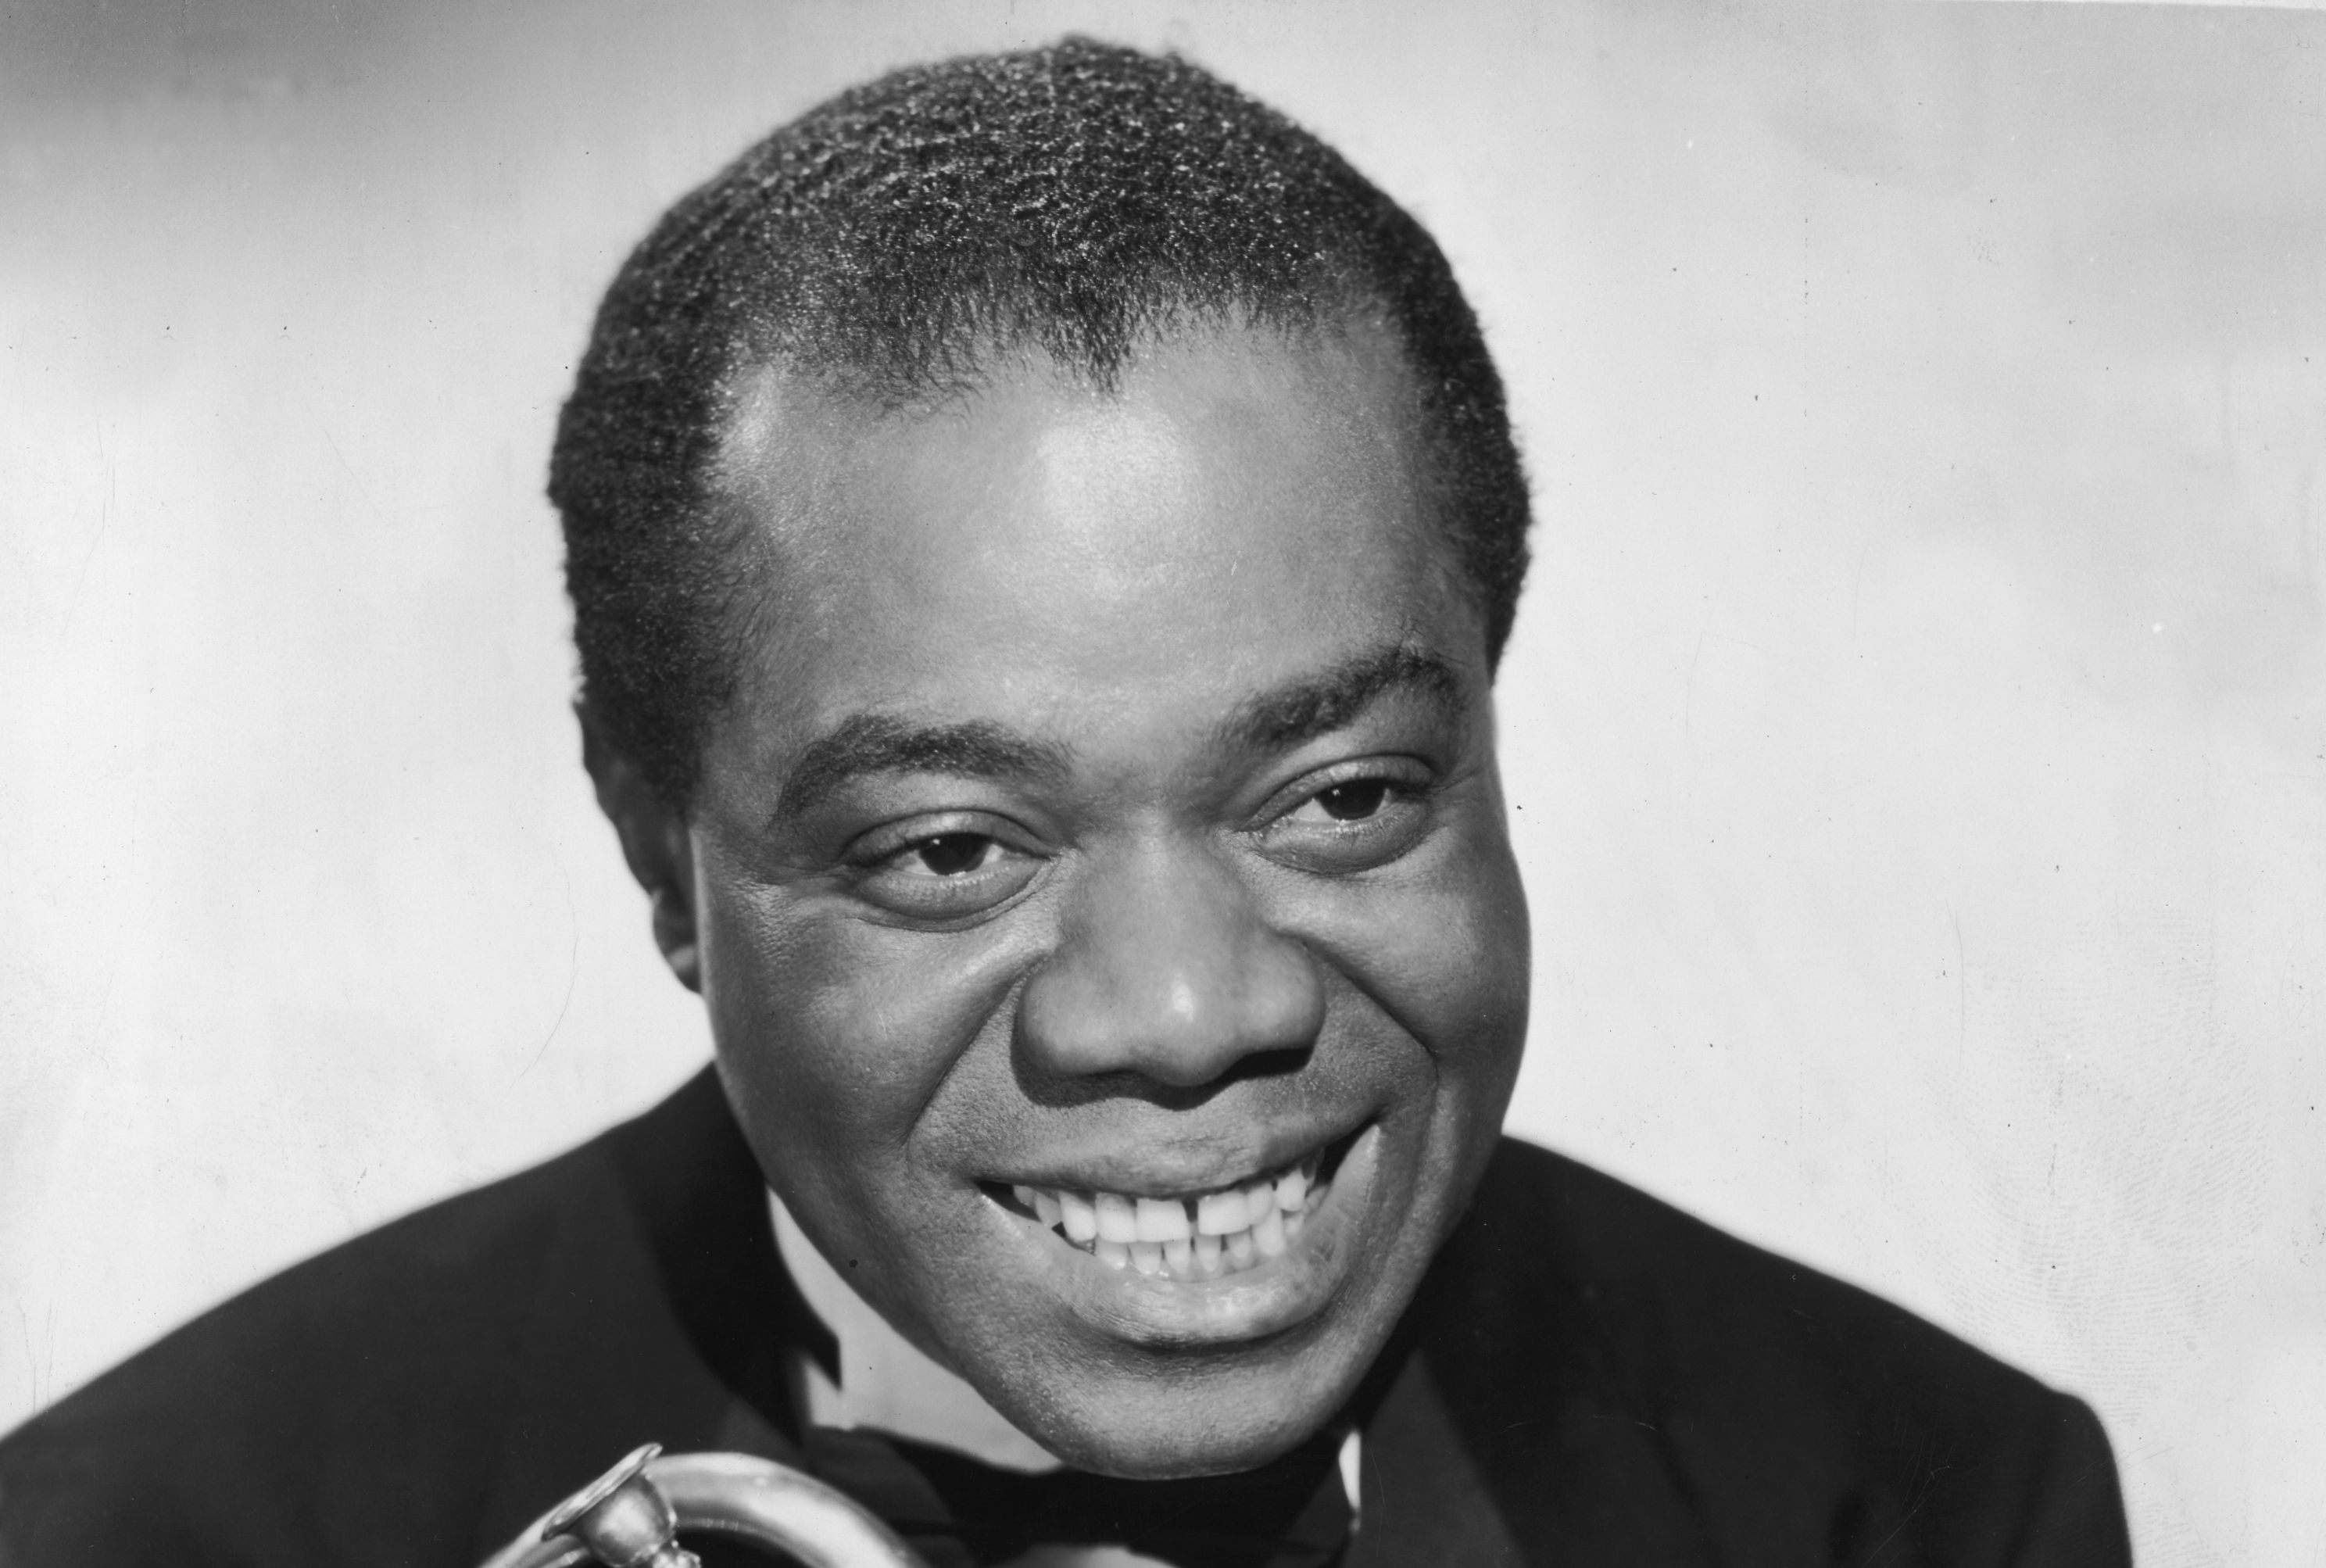 Louis Armstrong Biography, American Masters